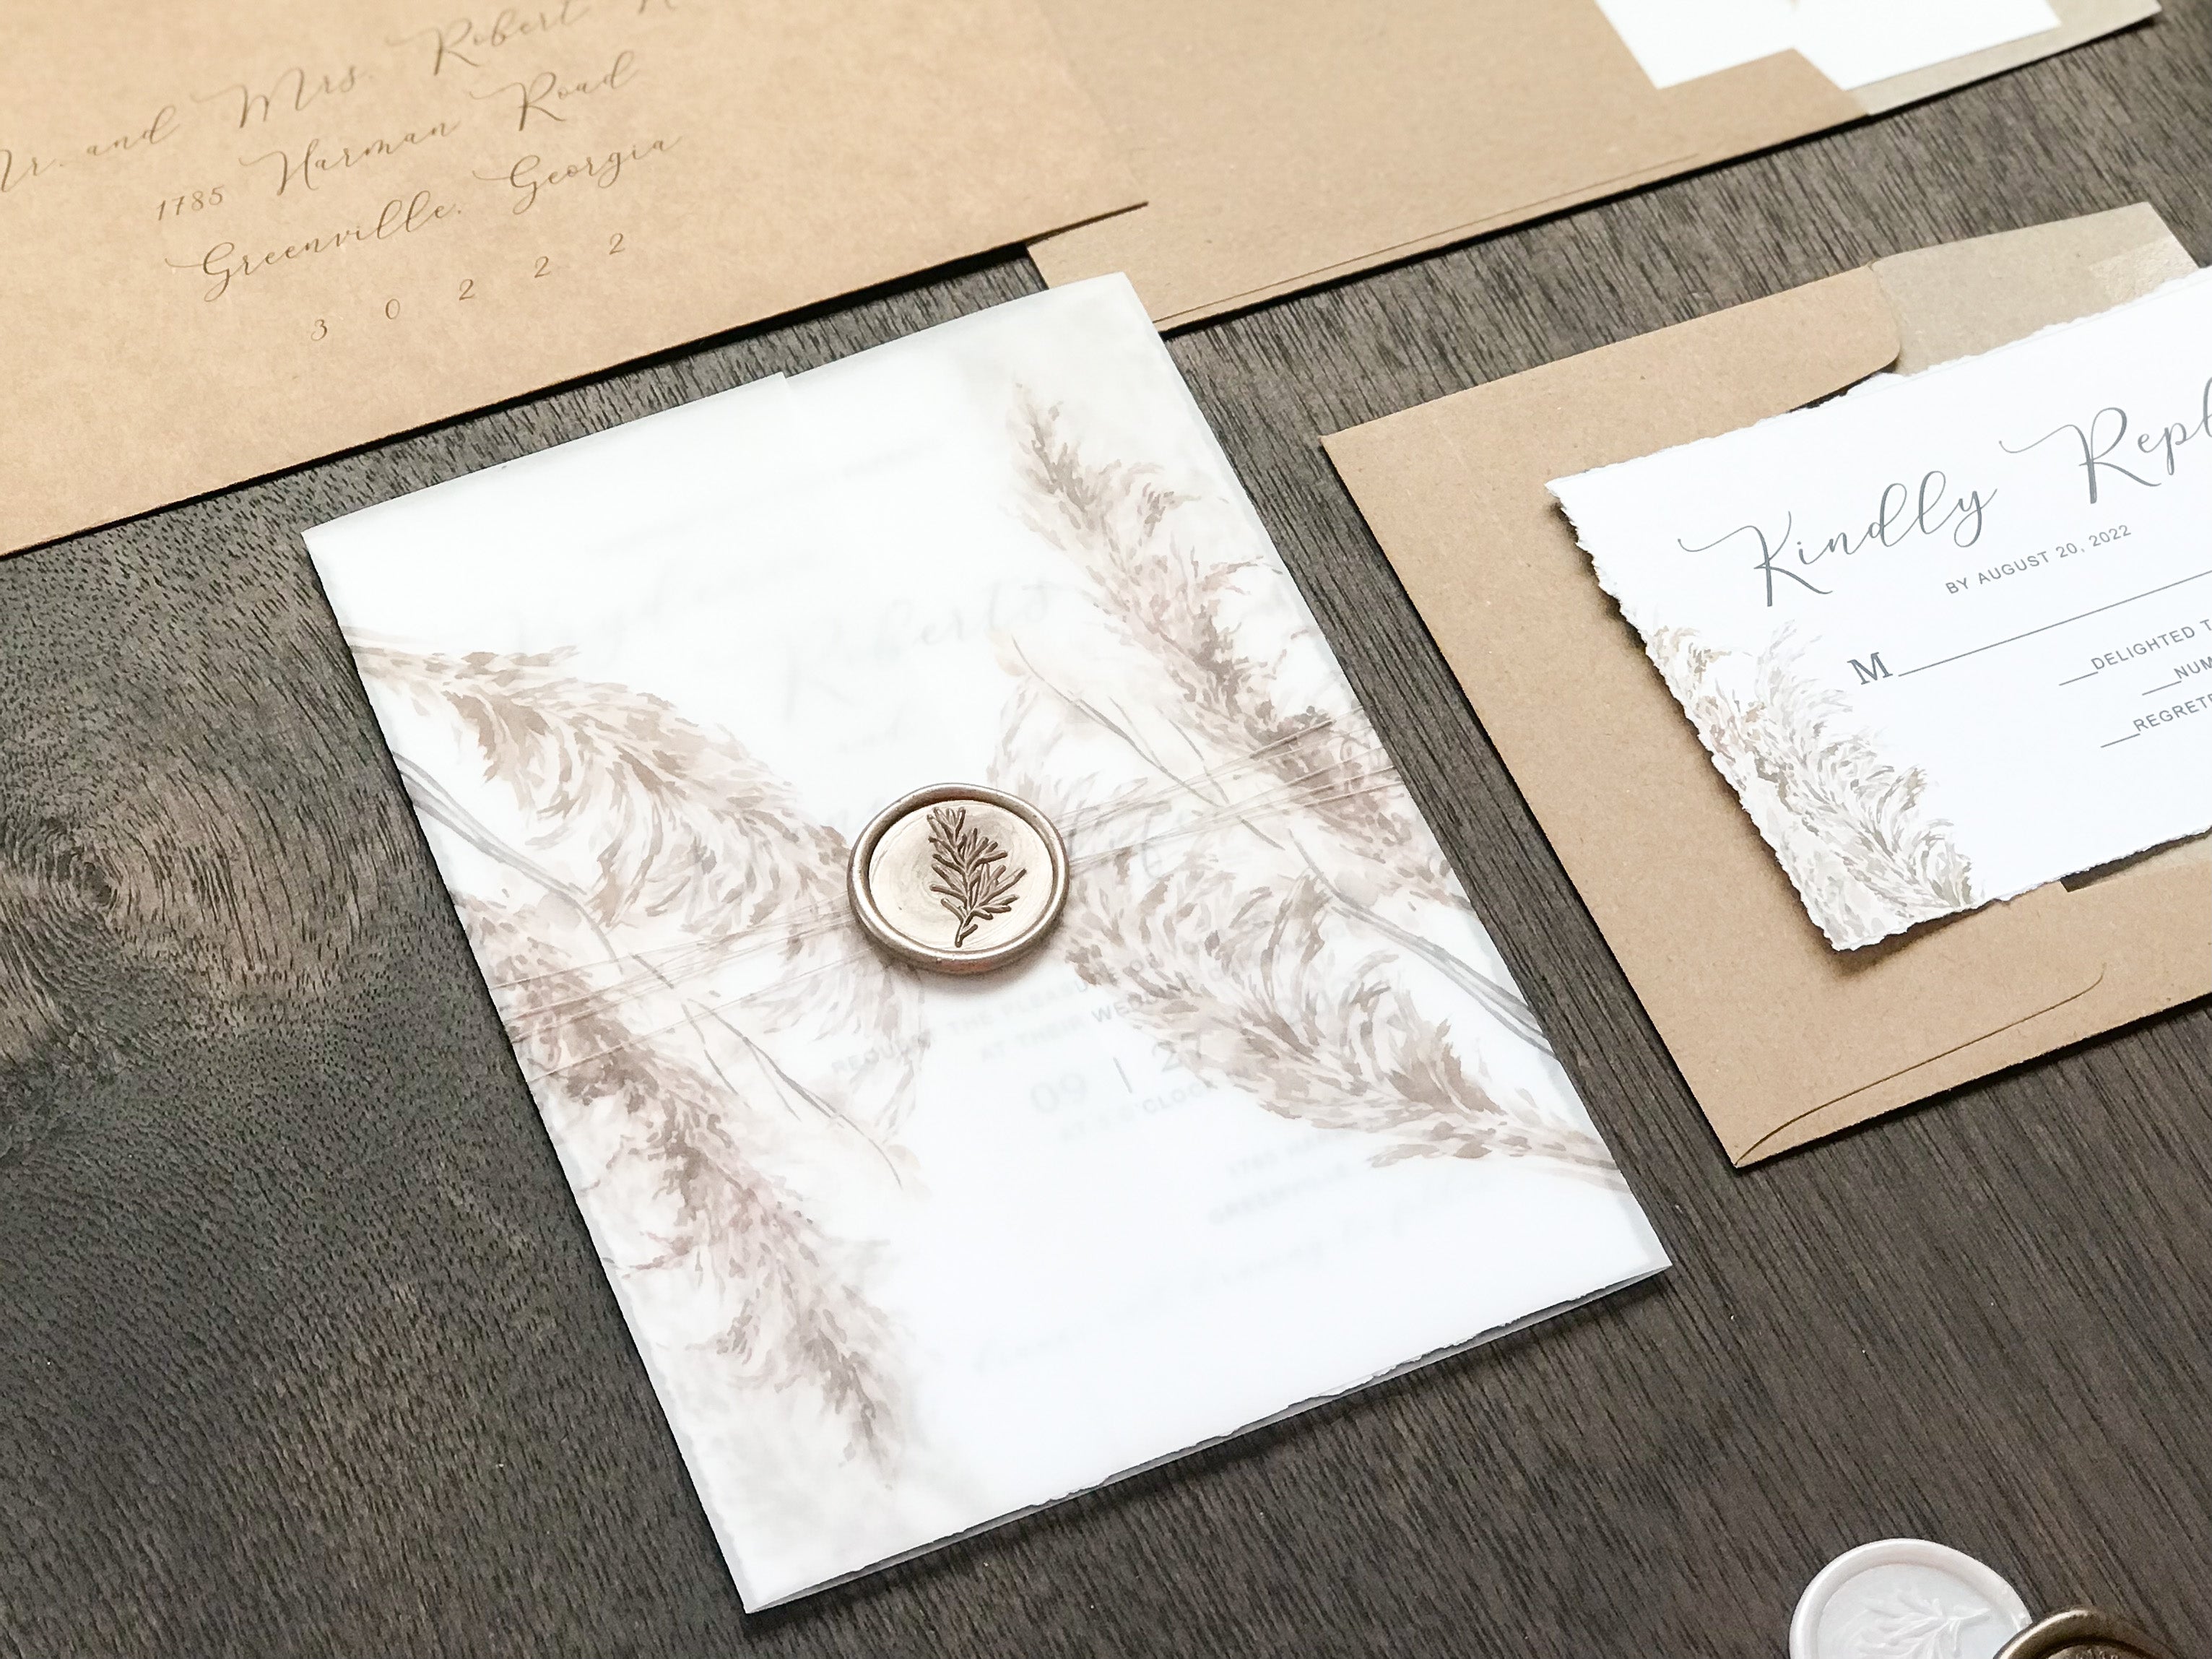 Deckled Edge Boho Vellum Wedding Invitation with Wax Seal and Pampas Grass